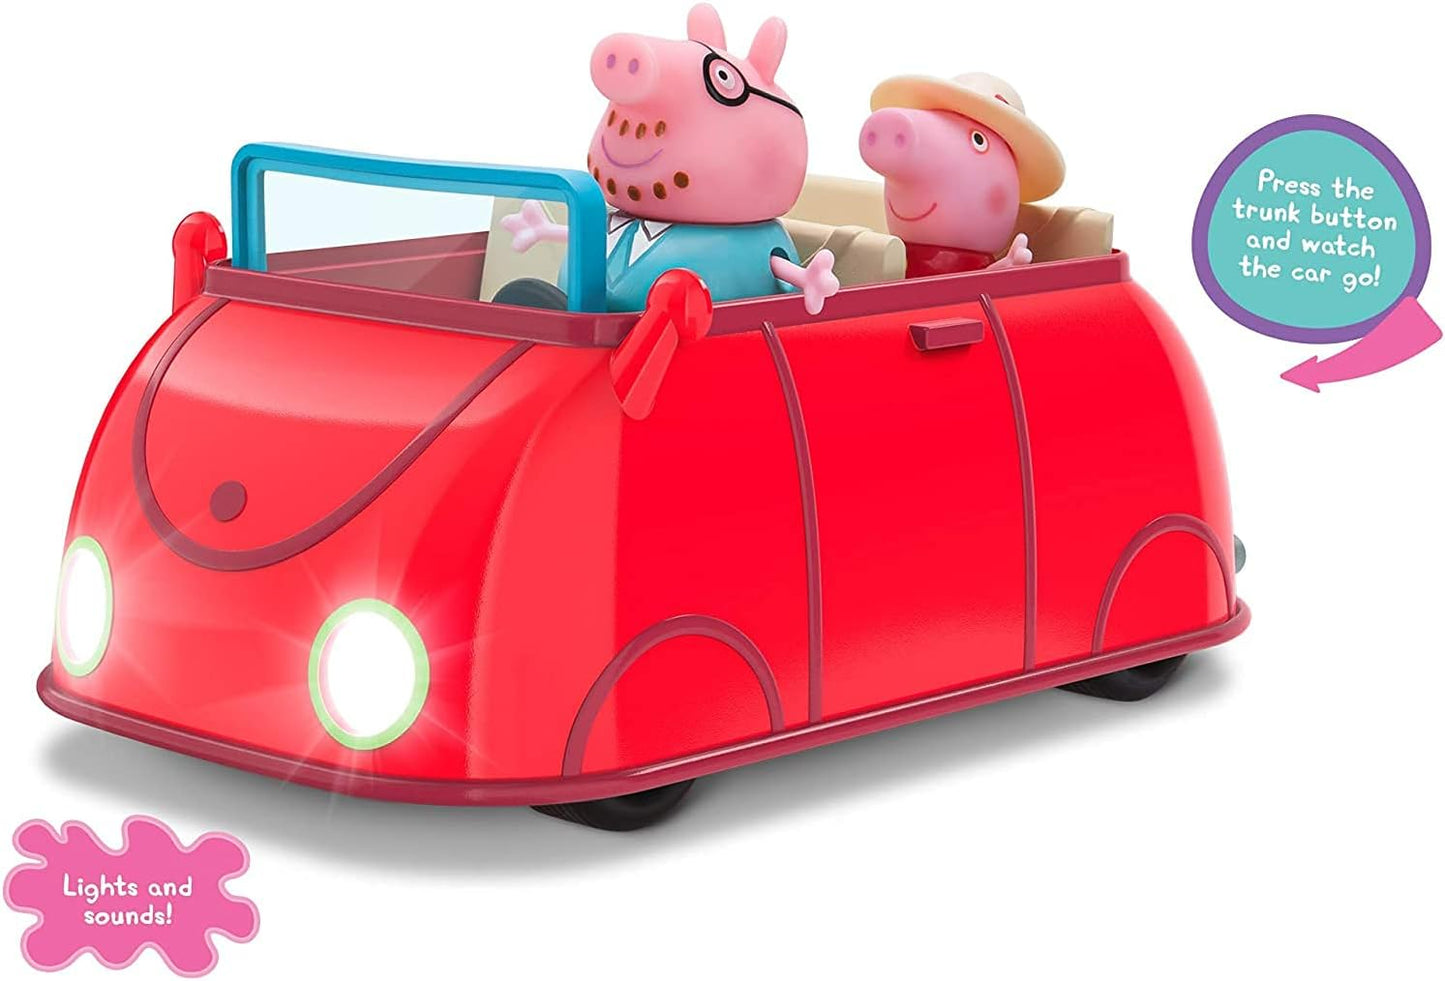 Peppa Pig Lights & Sounds Family Fun Car Vehicle Playset, 3 Pieces - Includes Interactive Red Car with Peppa and Daddy Pig Figures - Toy Gift for Kids - Ages 2+